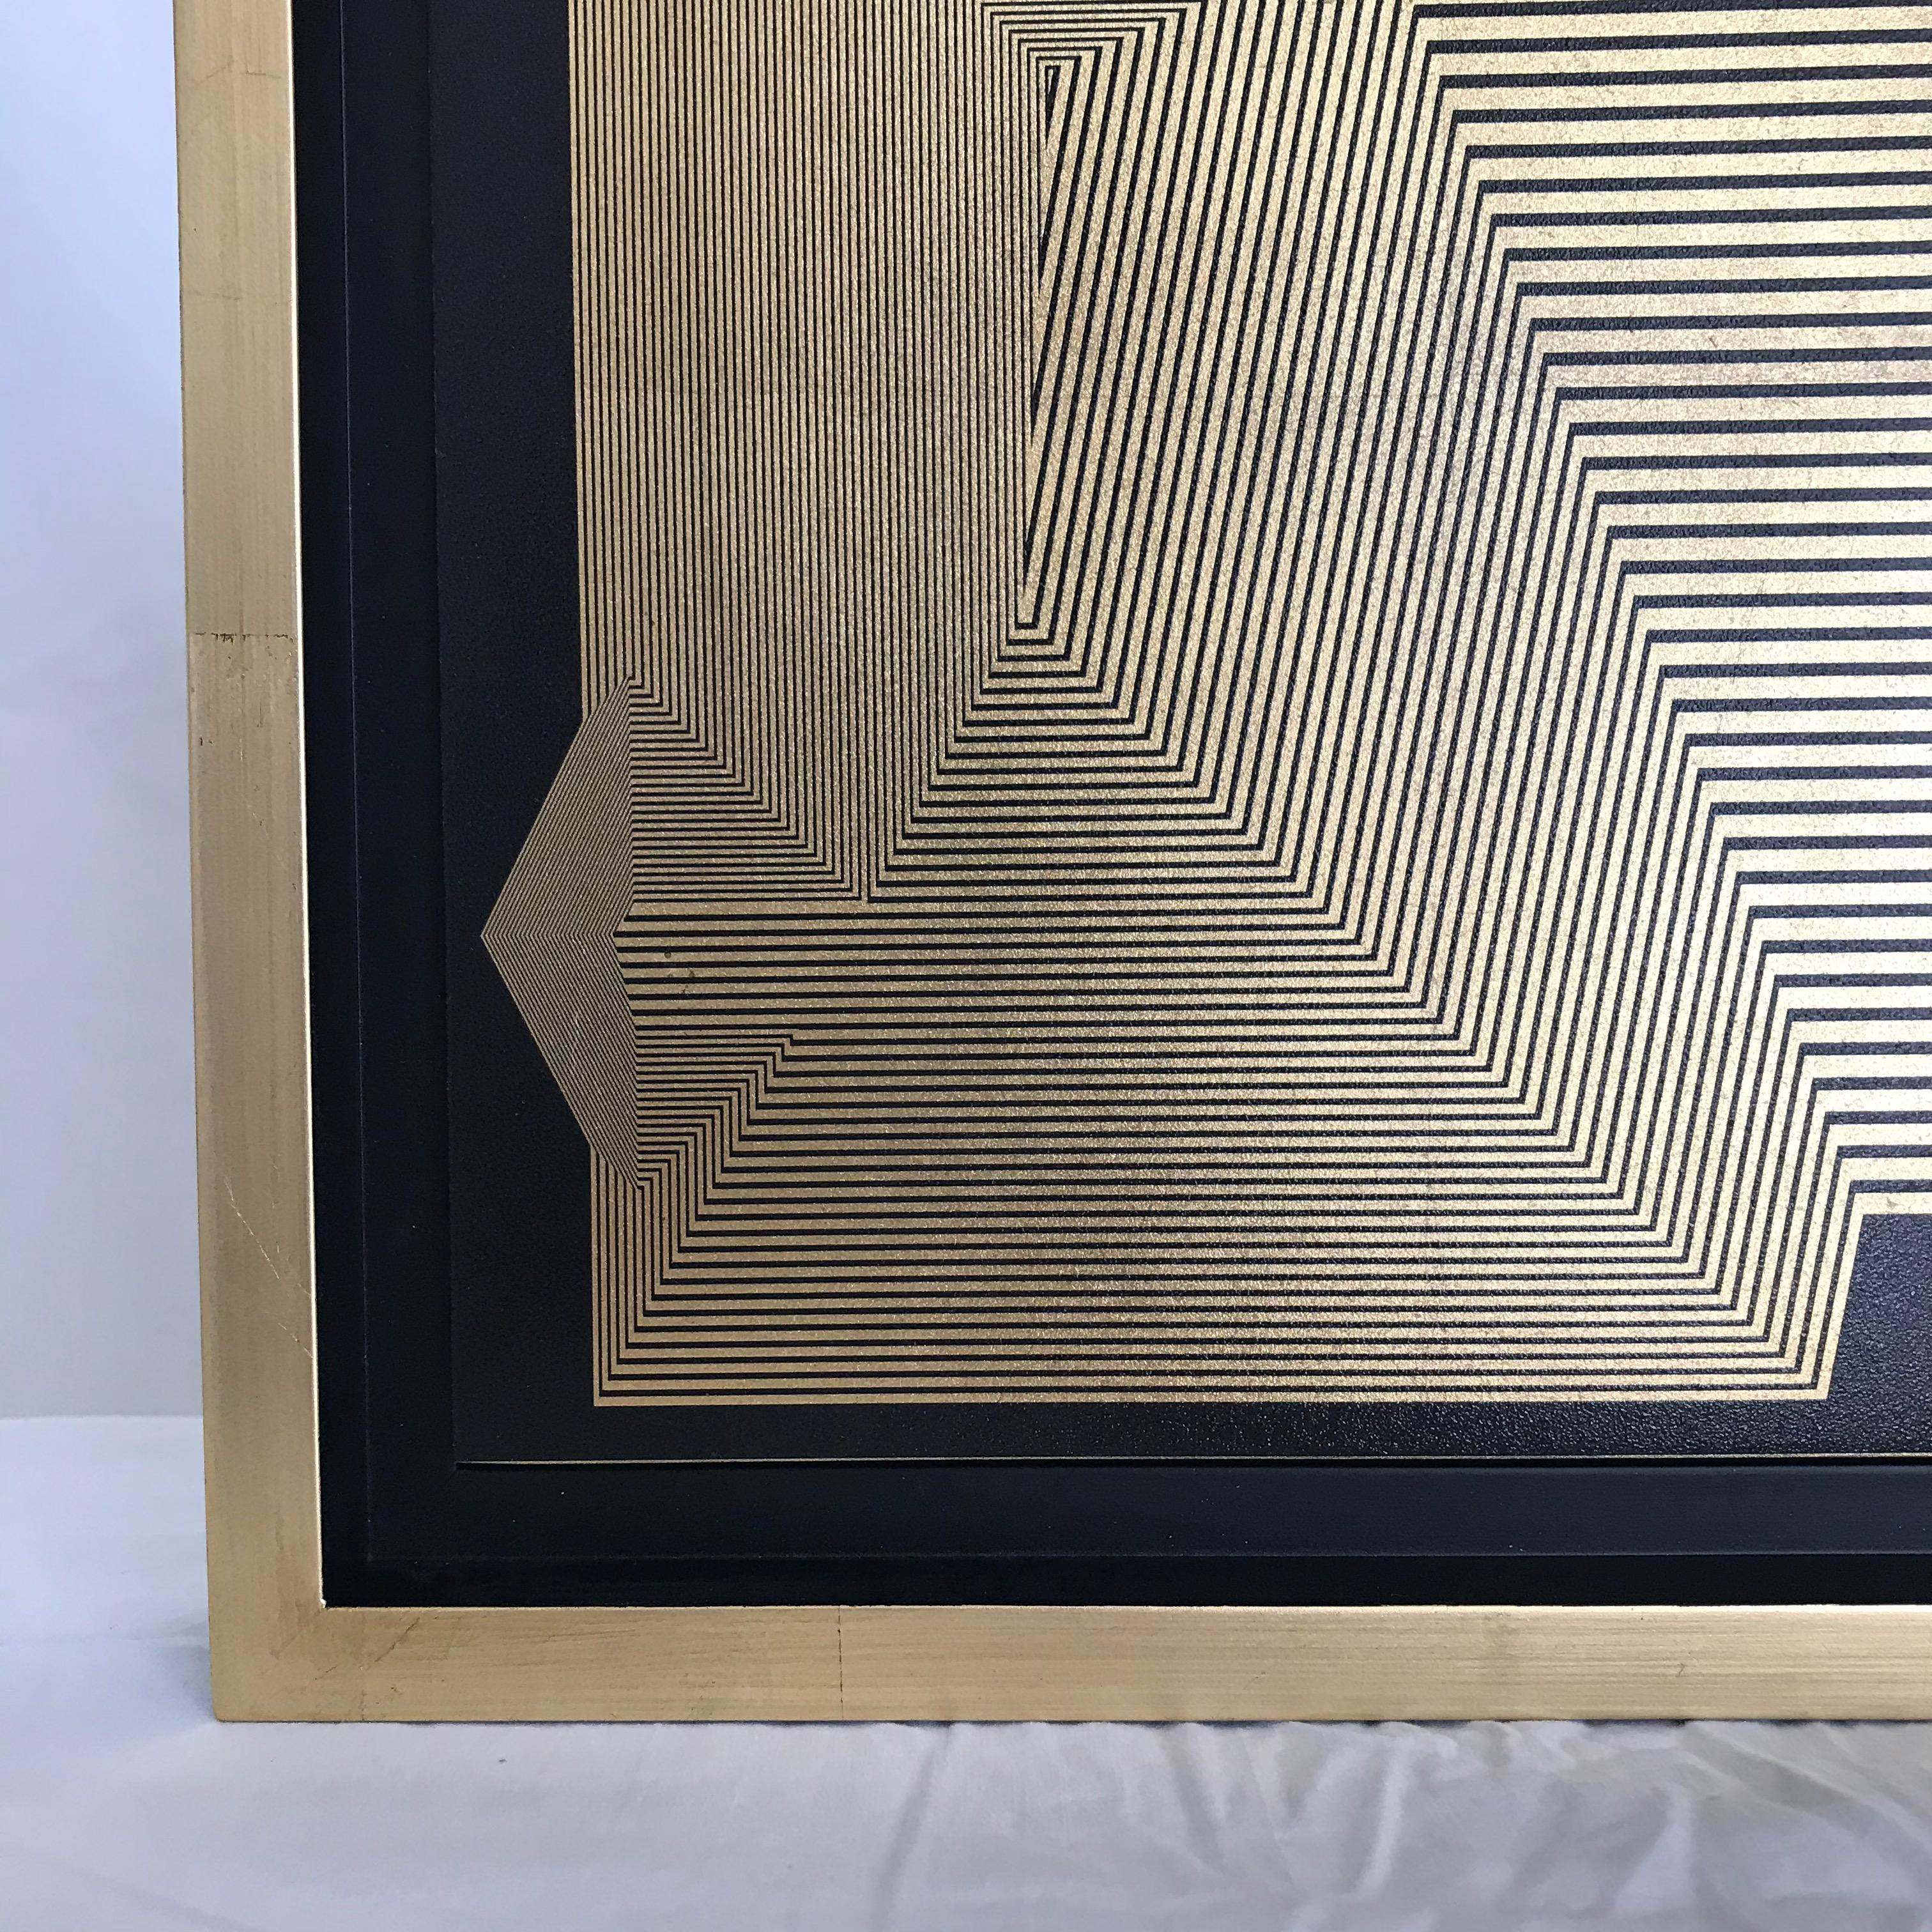 Untitled 19, 2019 by Francisco Larios
Lacquer, Acrylic, oil, and gold leaf on MDF Deep
Image Size: 9.5 in. H x 9.5 in. W
Frame Size: 11.6 in. H x 11.6 in. W x 1.5 in. D
One of a kind

From the  Mexican Ryōan-ji Series.
Ryōan-ji is the Japanese Zen